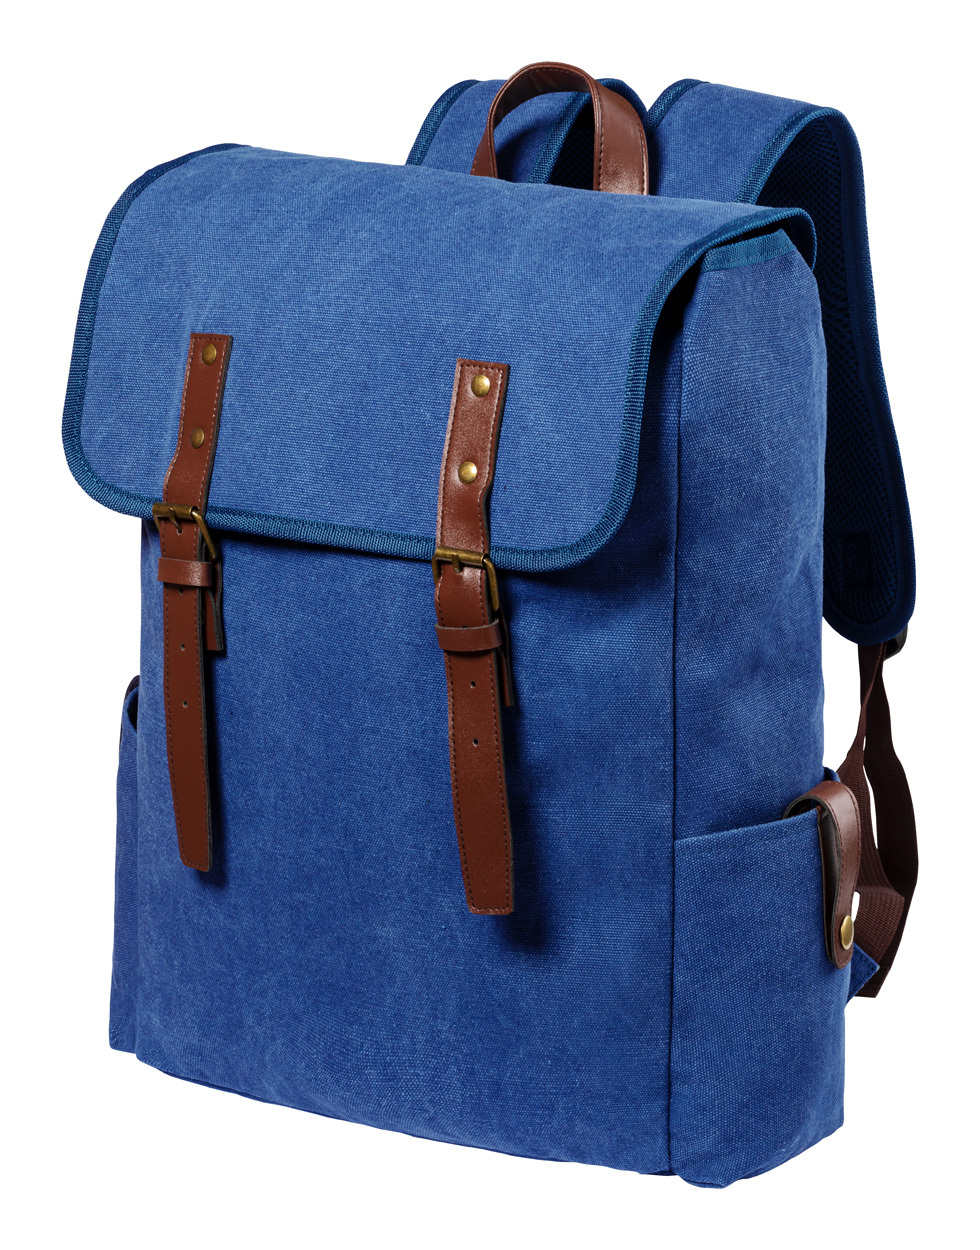 Snorlax backpack - blue